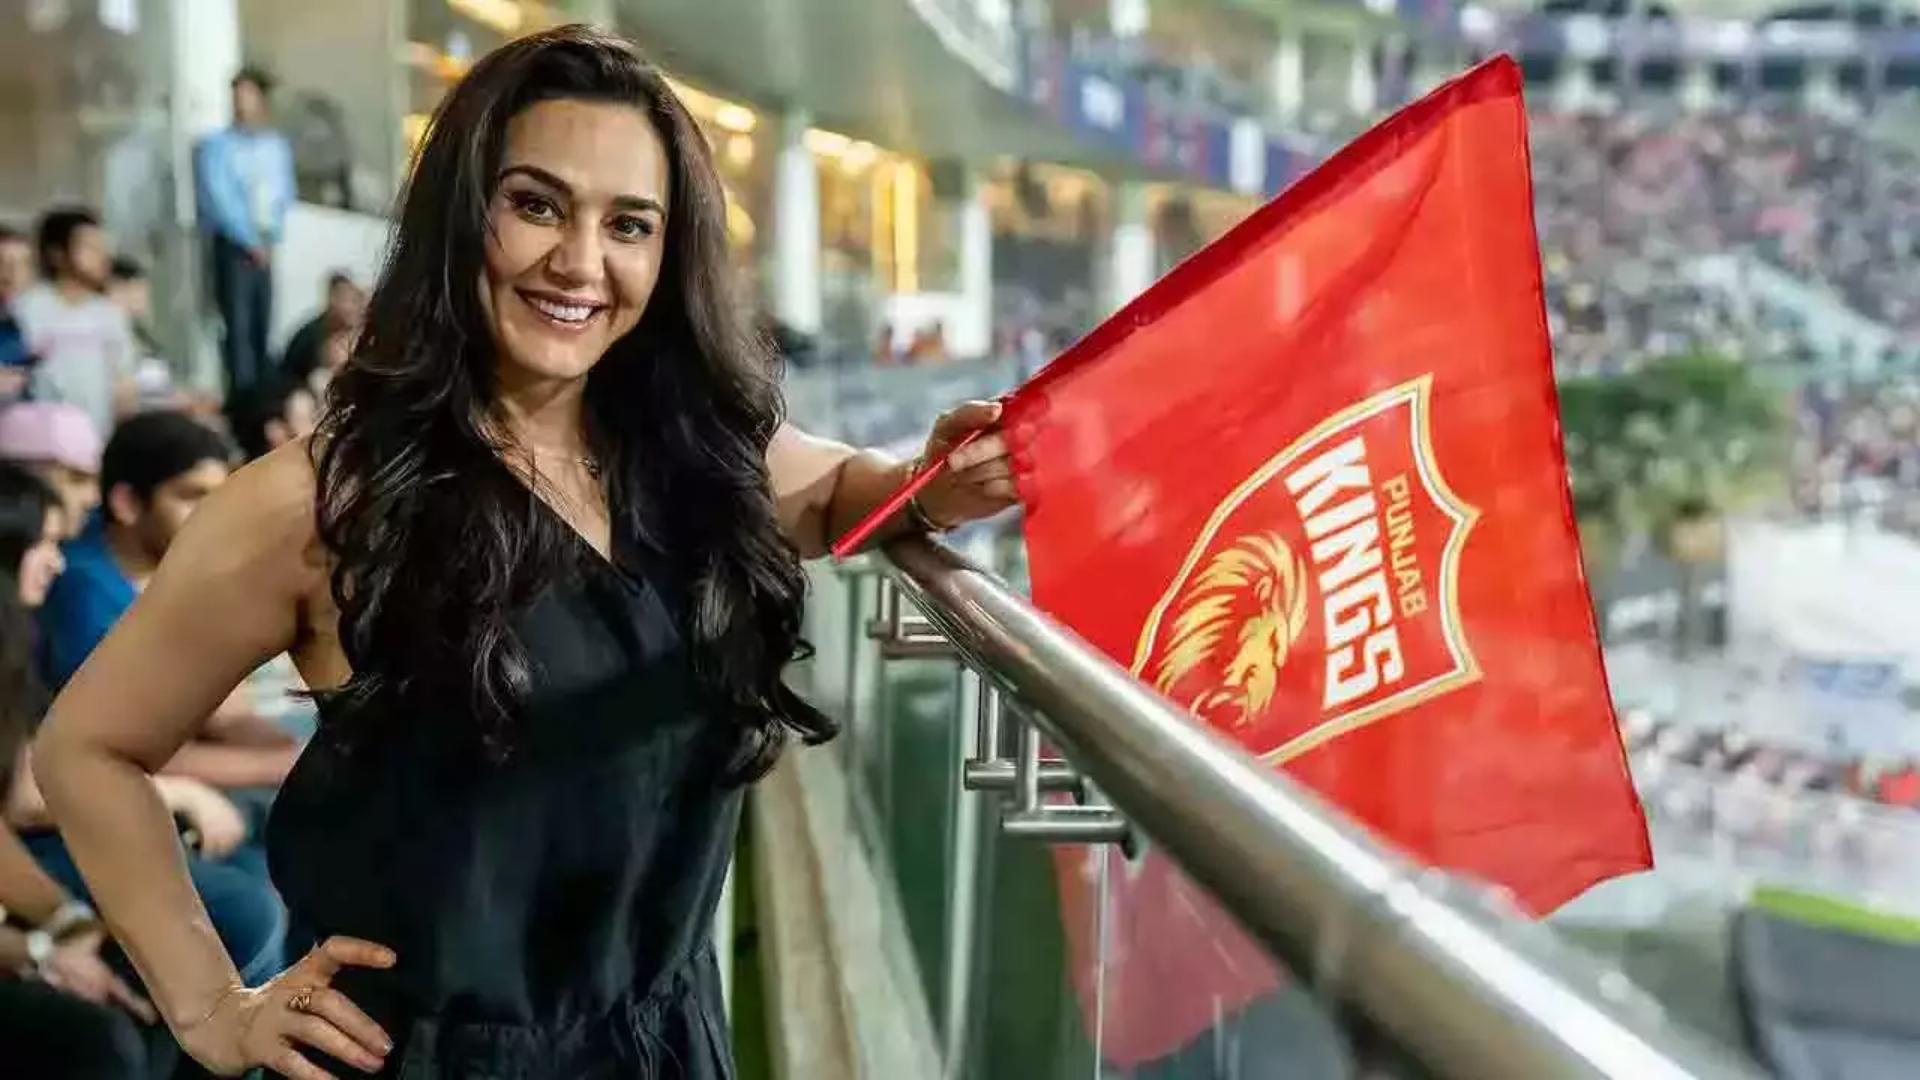 Preity Zinta’s Heartfelt Gesture: From Bollywood To The IPL, Aloo Parathas Bind Punjab Kings Together